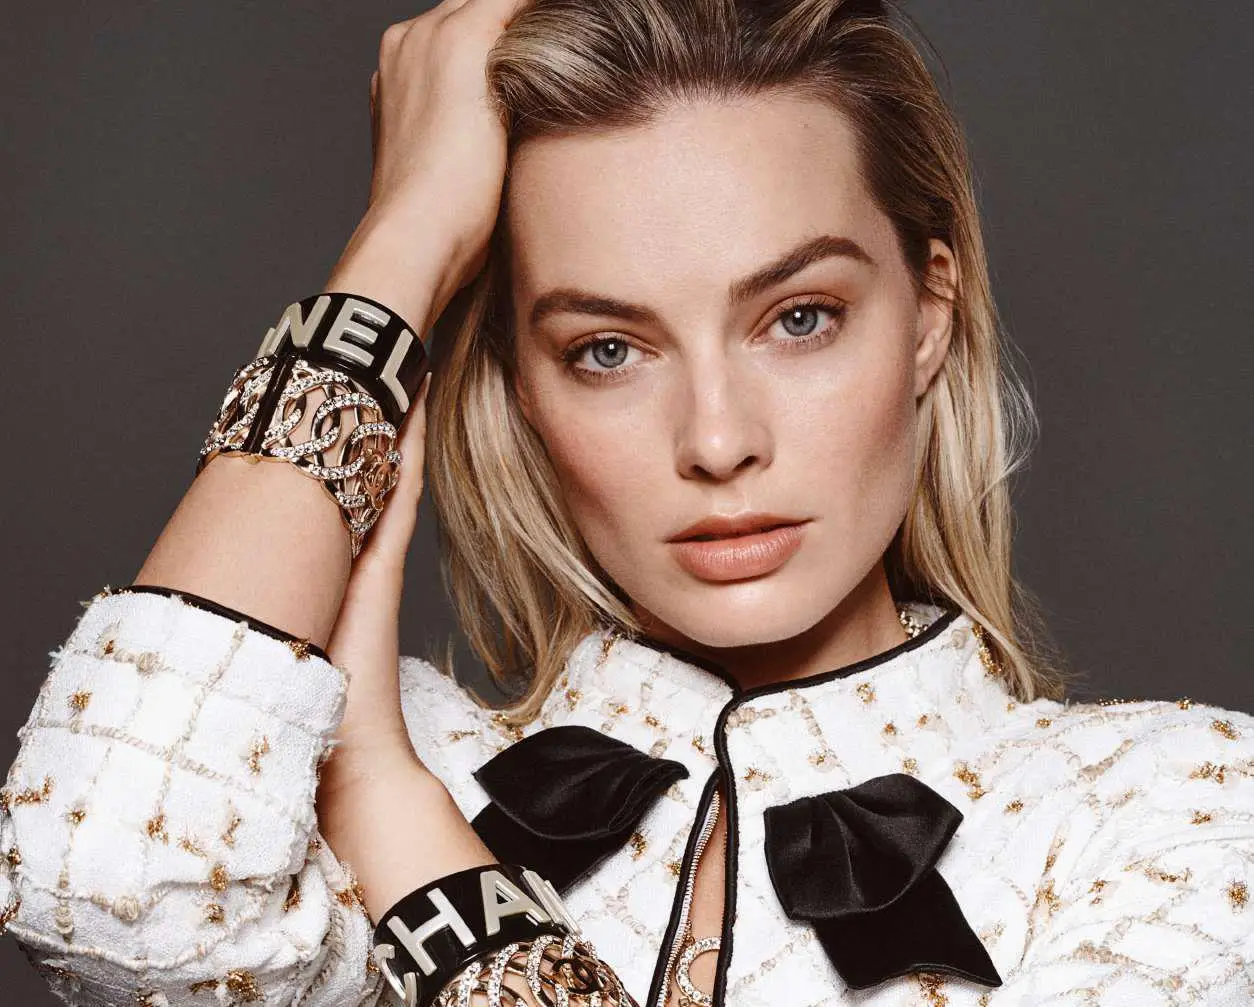 Margot Robbie by Liz Collins for Elle France February 2019 / AvaxHome